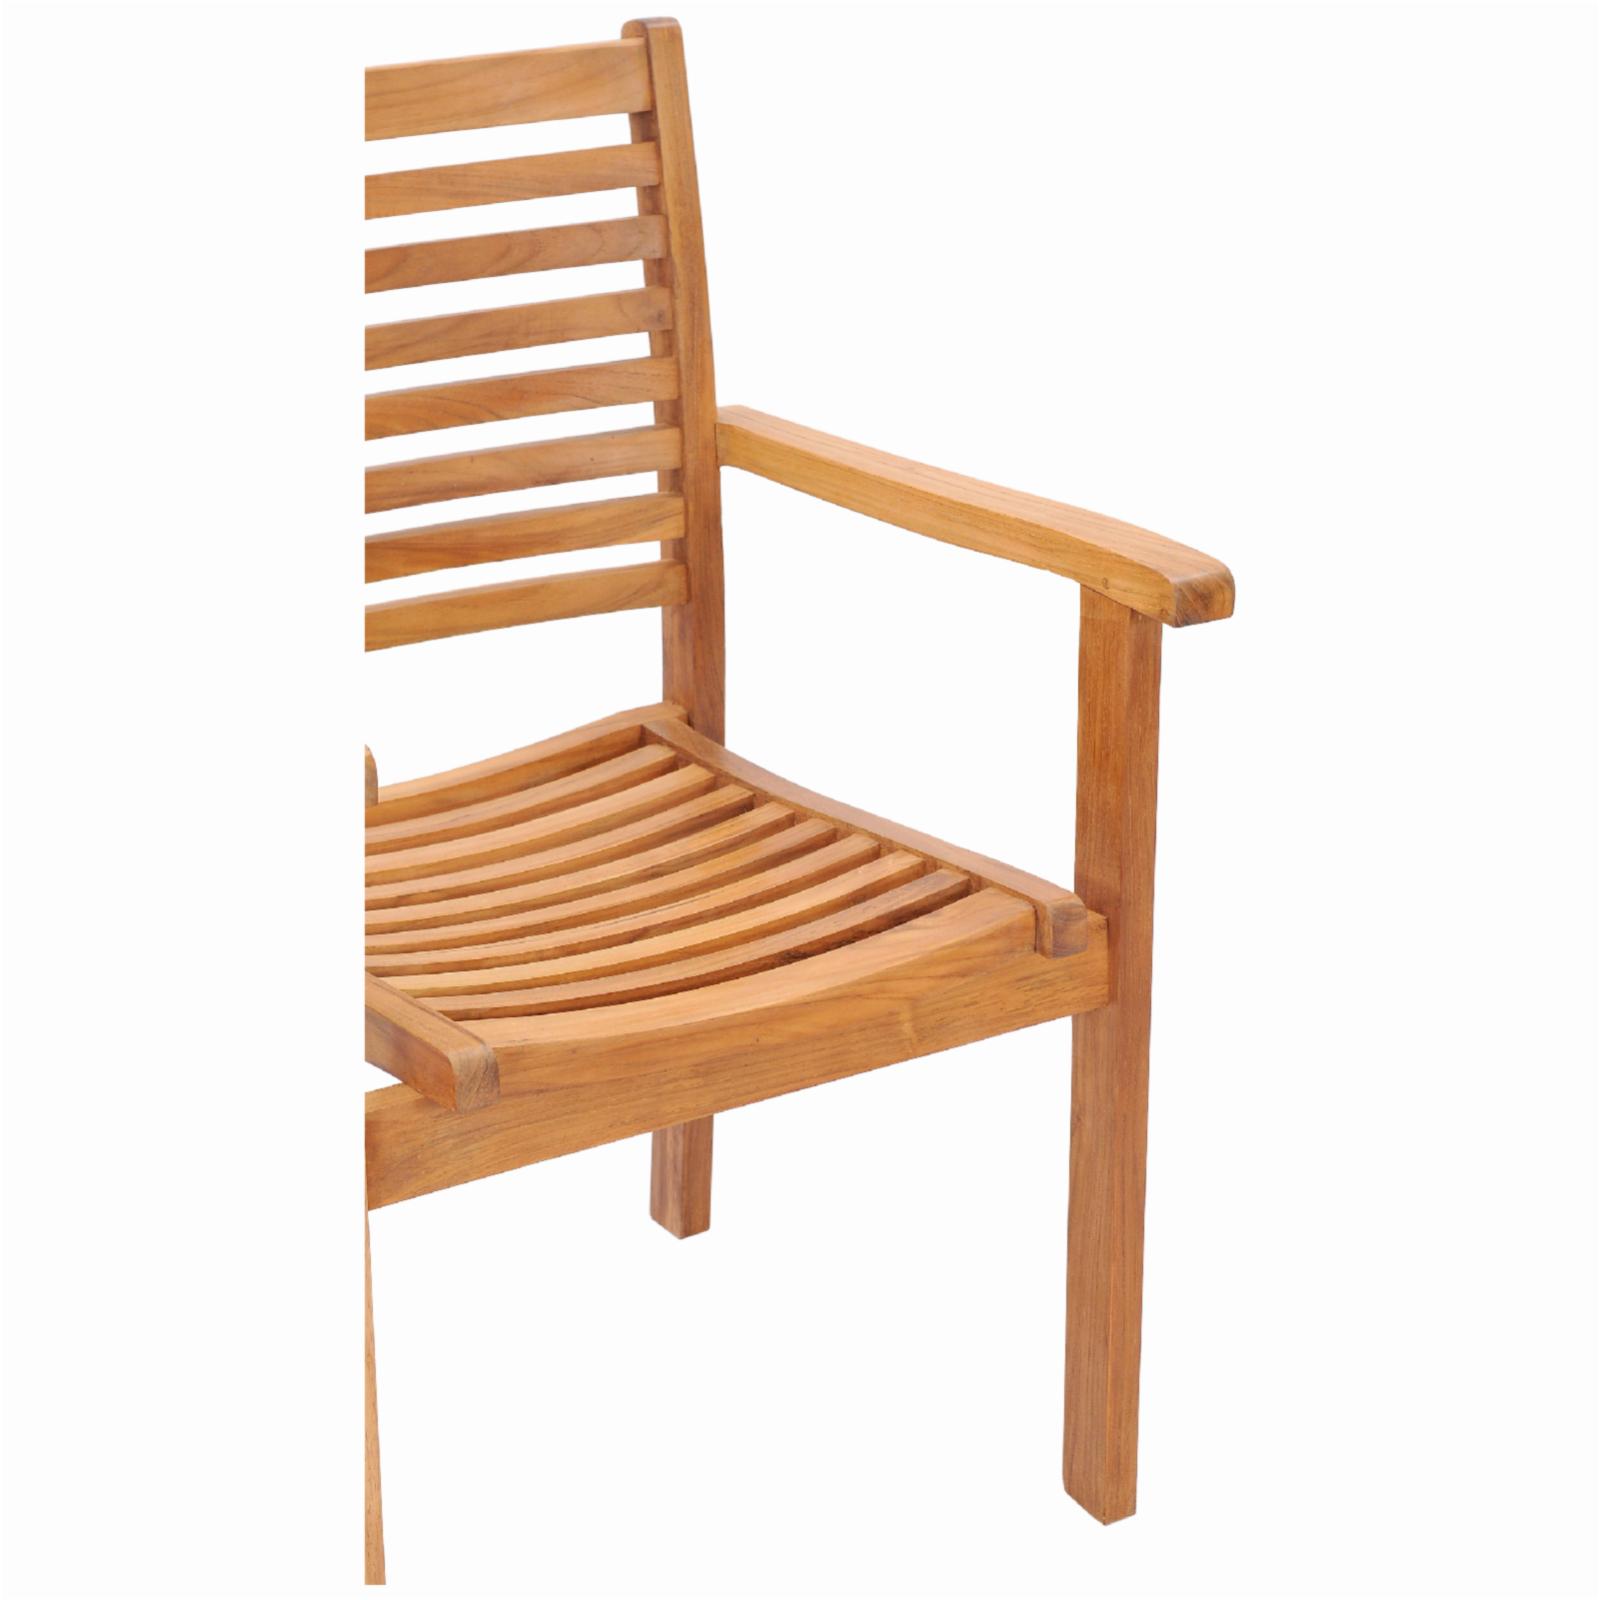 Chic Teak Italy Teak Stacking Patio Dining Chair - image 4 of 7